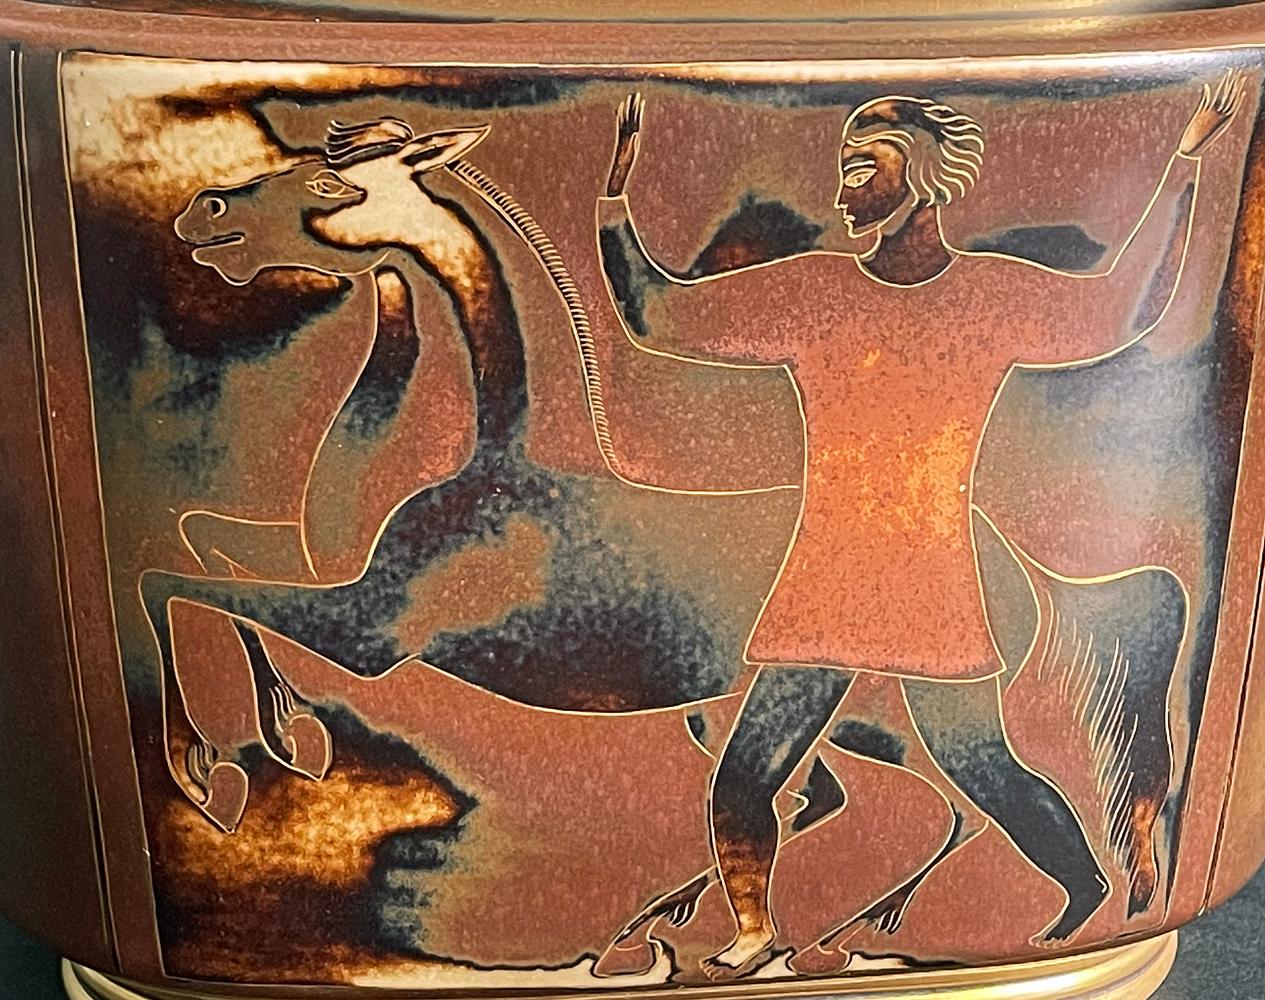 Gorgeously glazed in tones of rust, sable, ivory and chocolate, this unique lidded urn with foliated pinnacle and curving handles depicts a man with upraised arms and rearing horse on one side, and a female figure riding a horse on the other. The